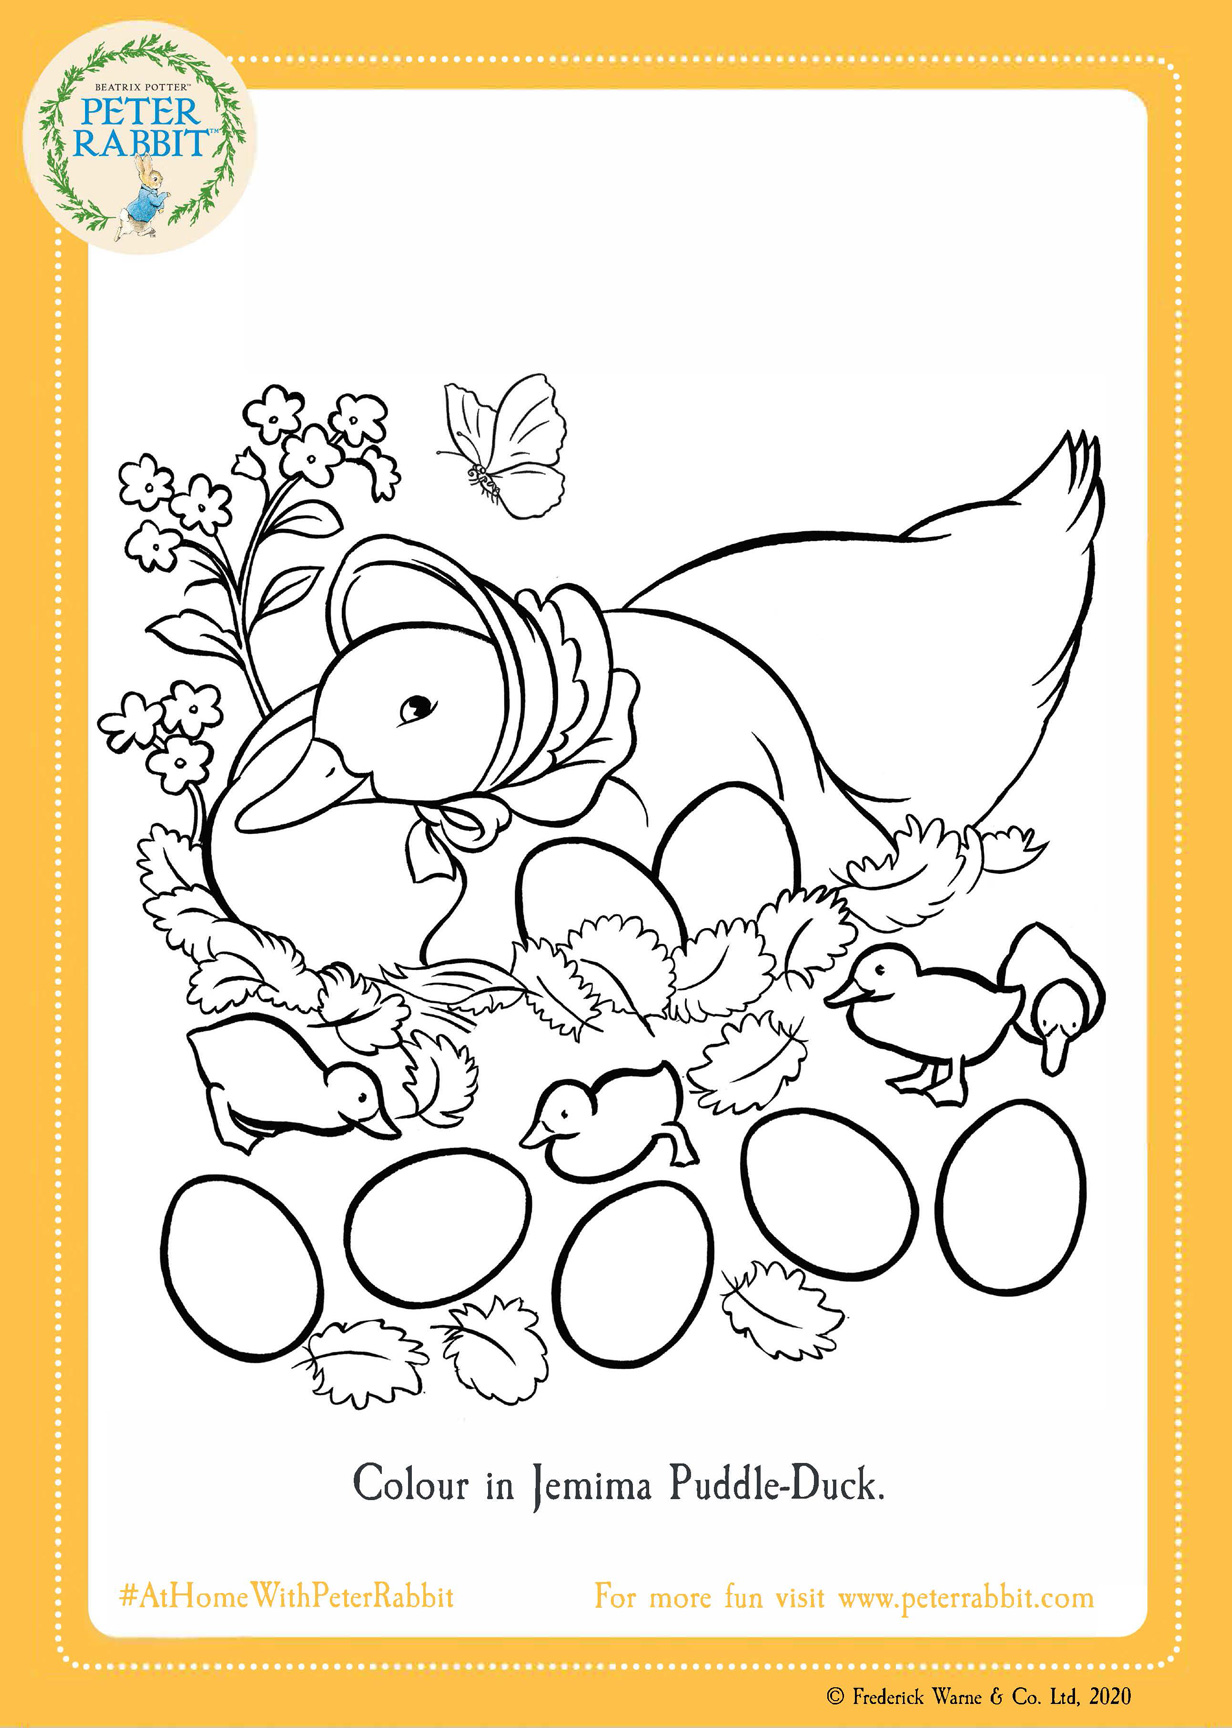 The cover image of the Jemima Puddle-duck Colouring Activity Pack on the Peter Rabbit website